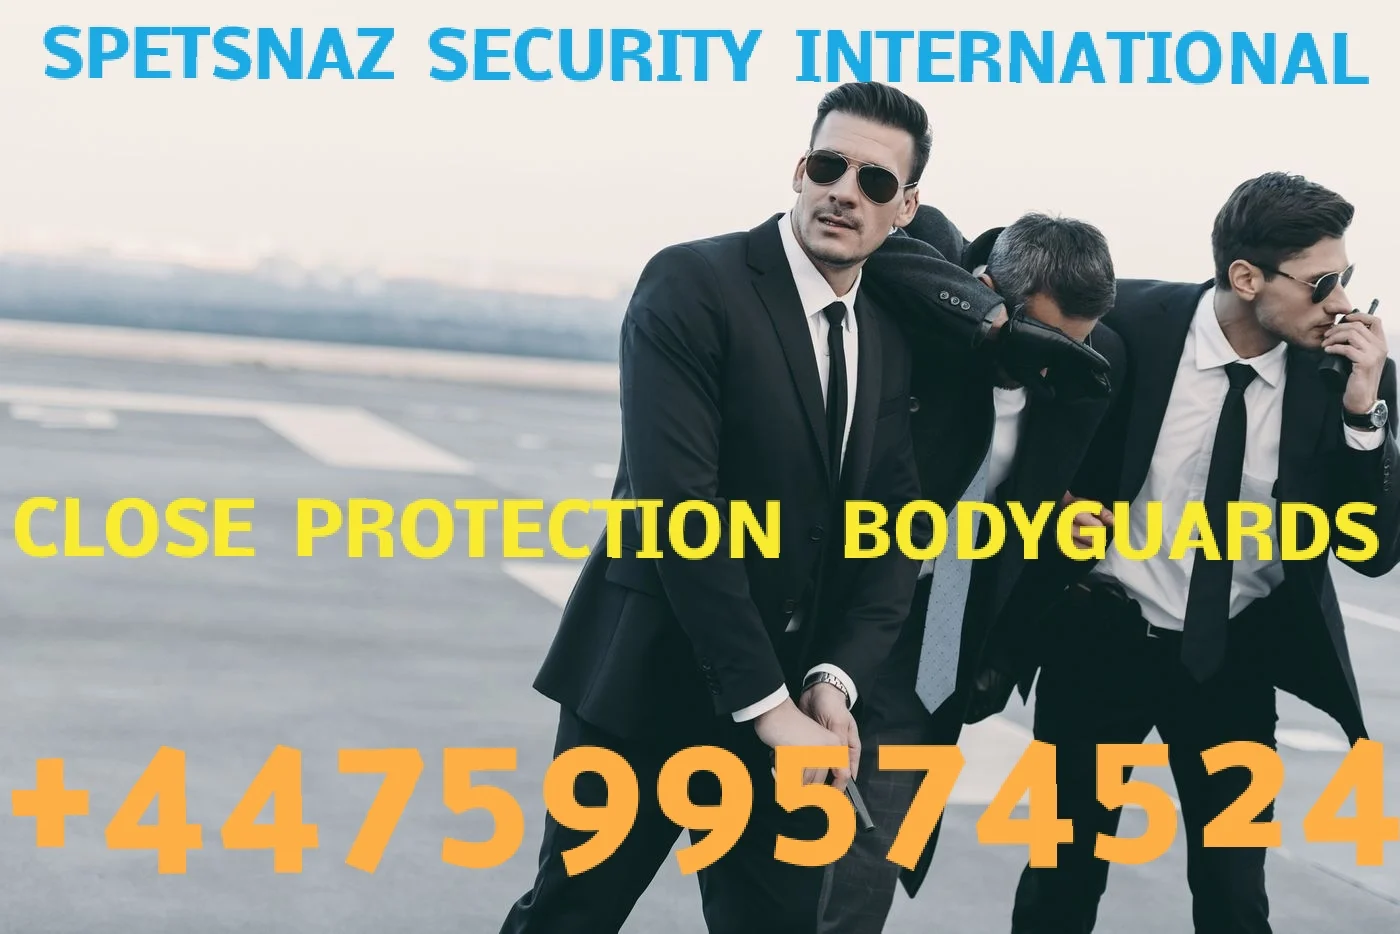 Armed Close Protection Services-Executive bodyguard-Executive Close Protection. With its close protection teams, Spetsnaz Security International Fidel Matola can work with its clients to protect their business's most valuable assets – their personnel, families, and their properties at all points in potential risk situations.-